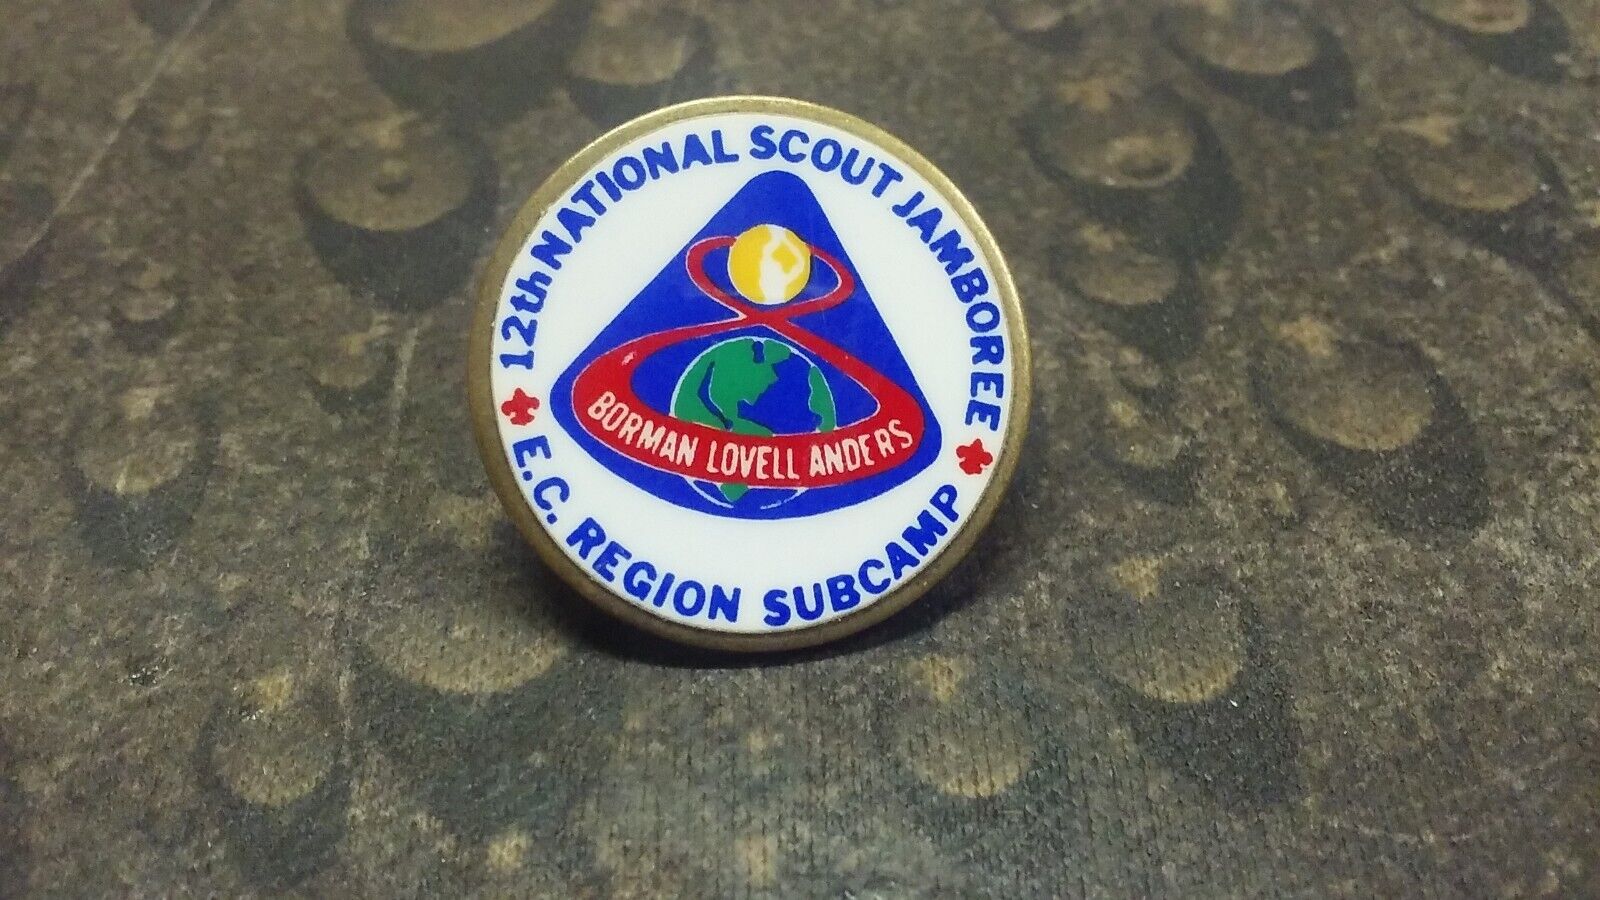 12th National Scout Jamboree BSA pin badge Boy Scouts E.C. Region Subcamp